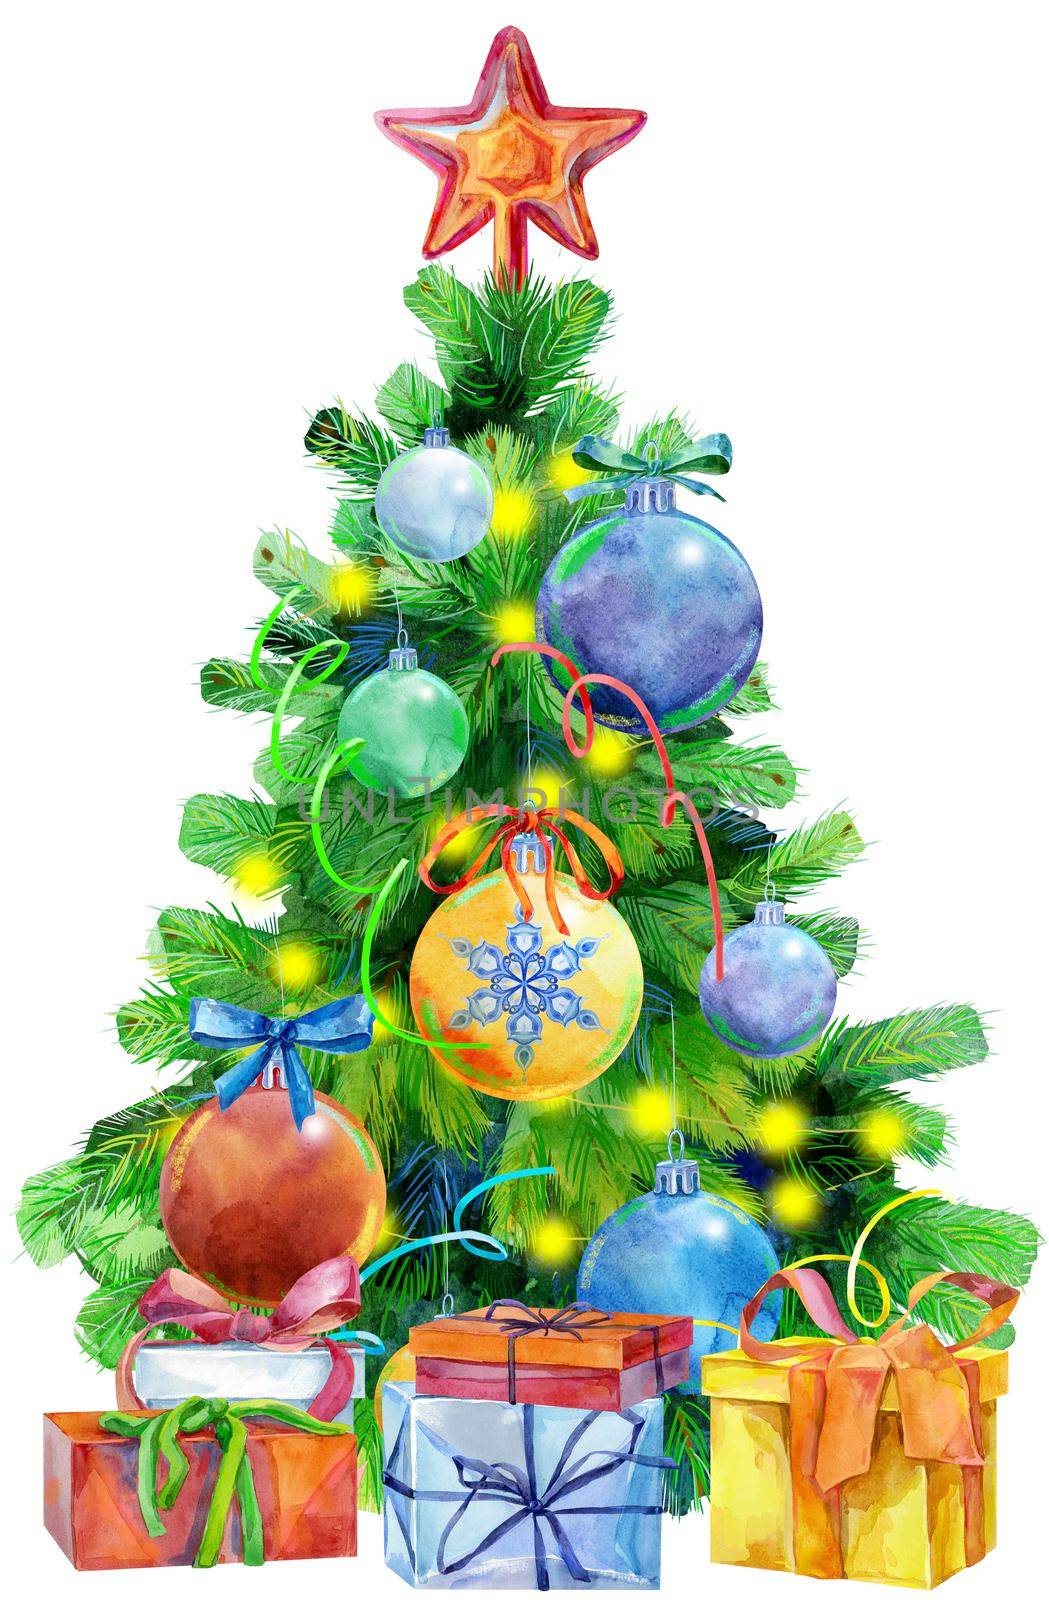 Watercolor illustration: Christmas tree decorated with decoration. Template for the design of posters, cards, invitations